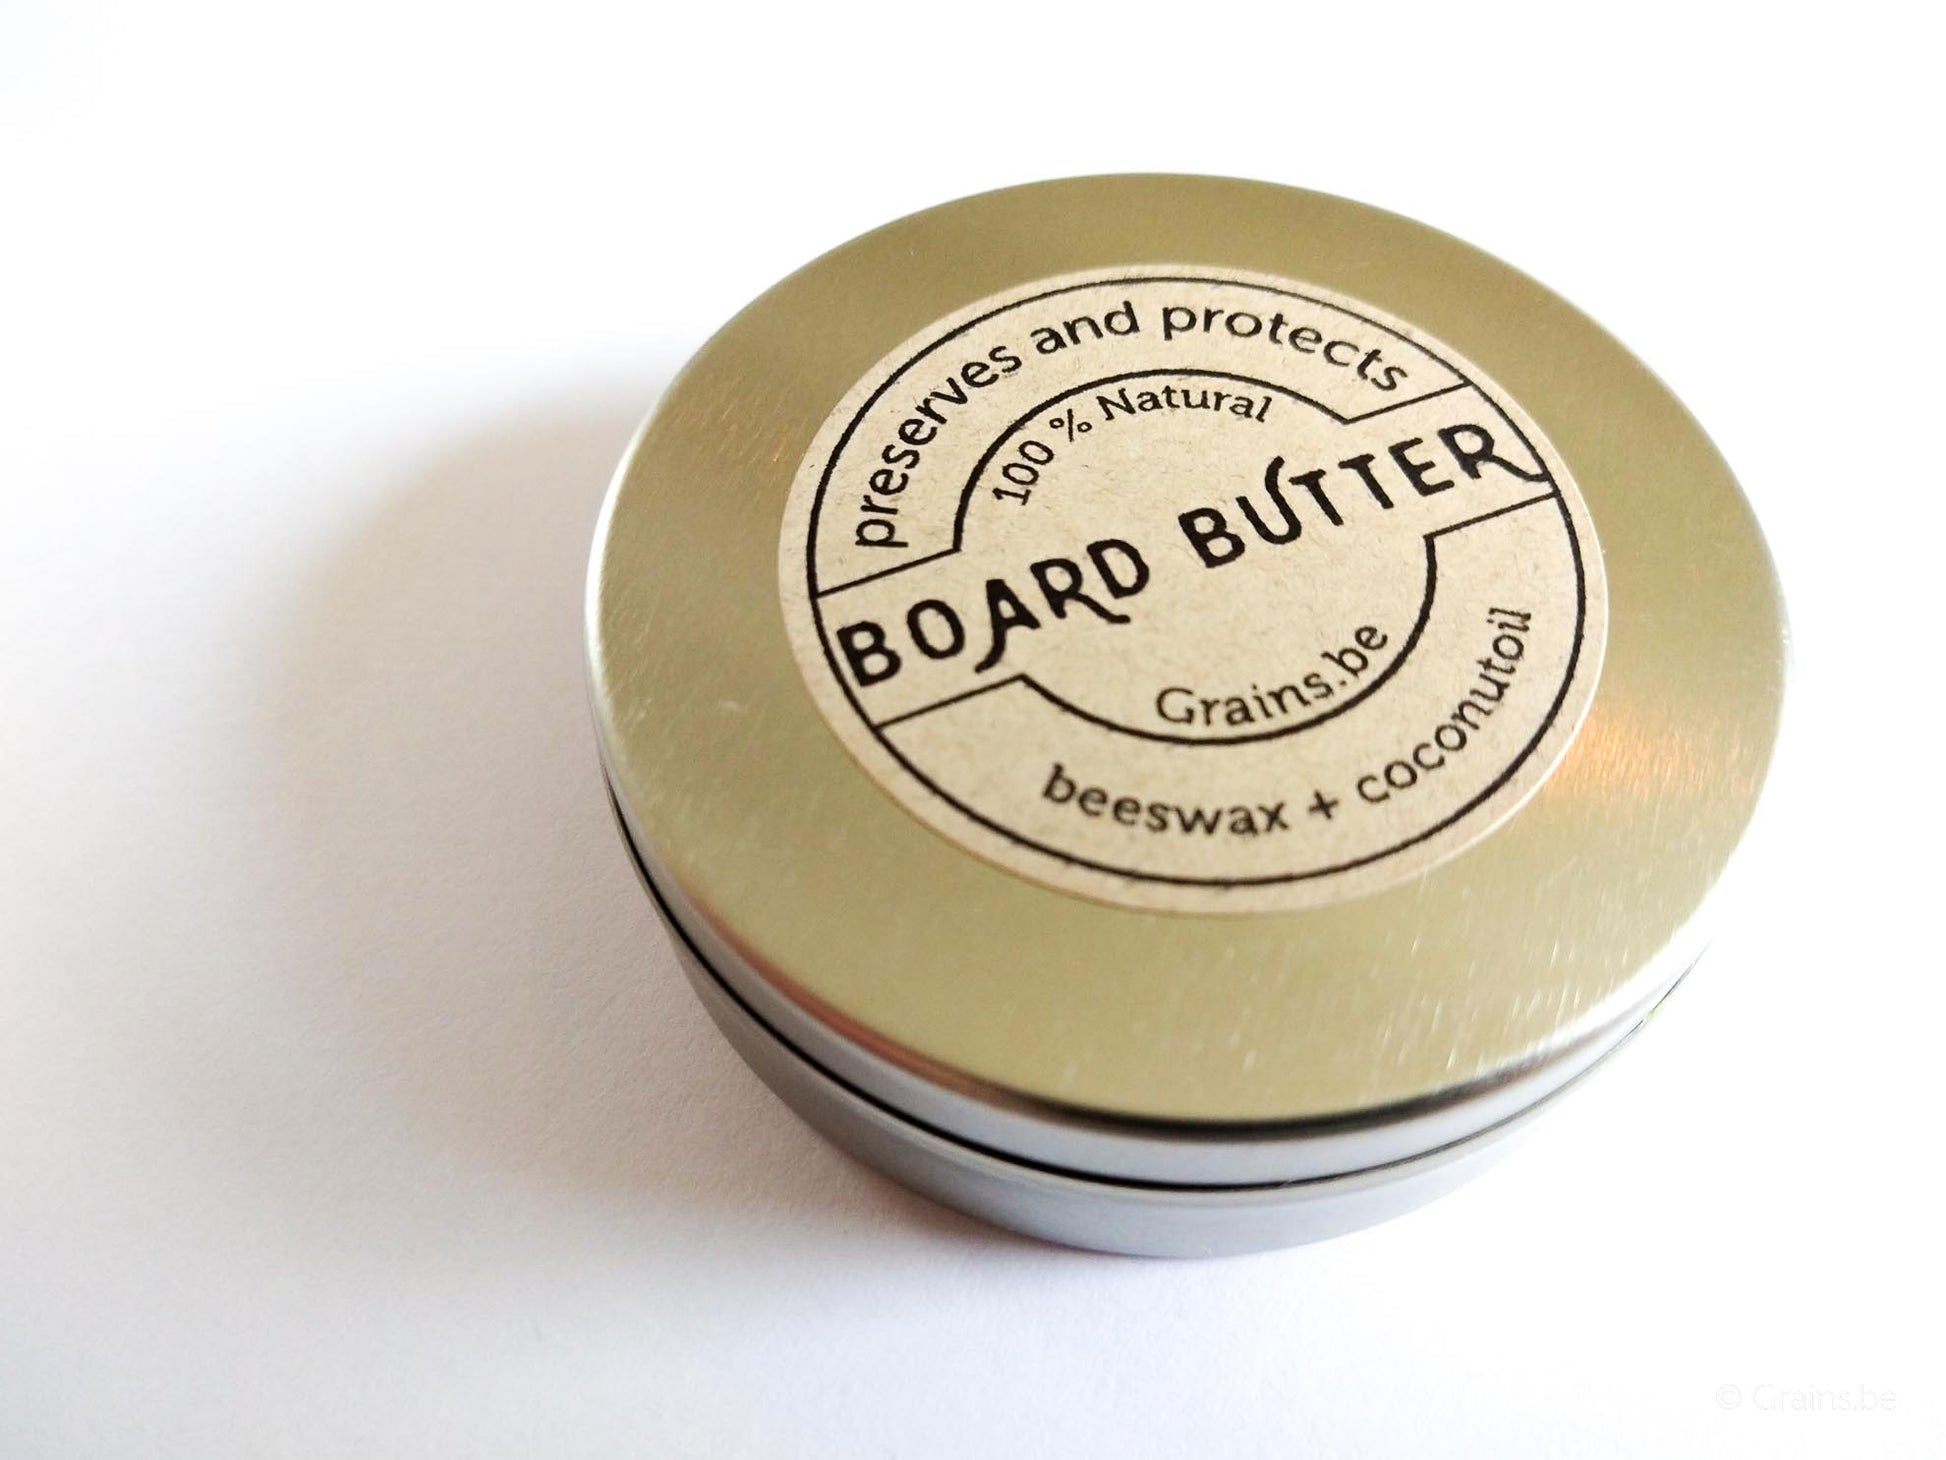 100% natural Boardbutter made with beeswax and coconutoil. 50ml sliplid cap